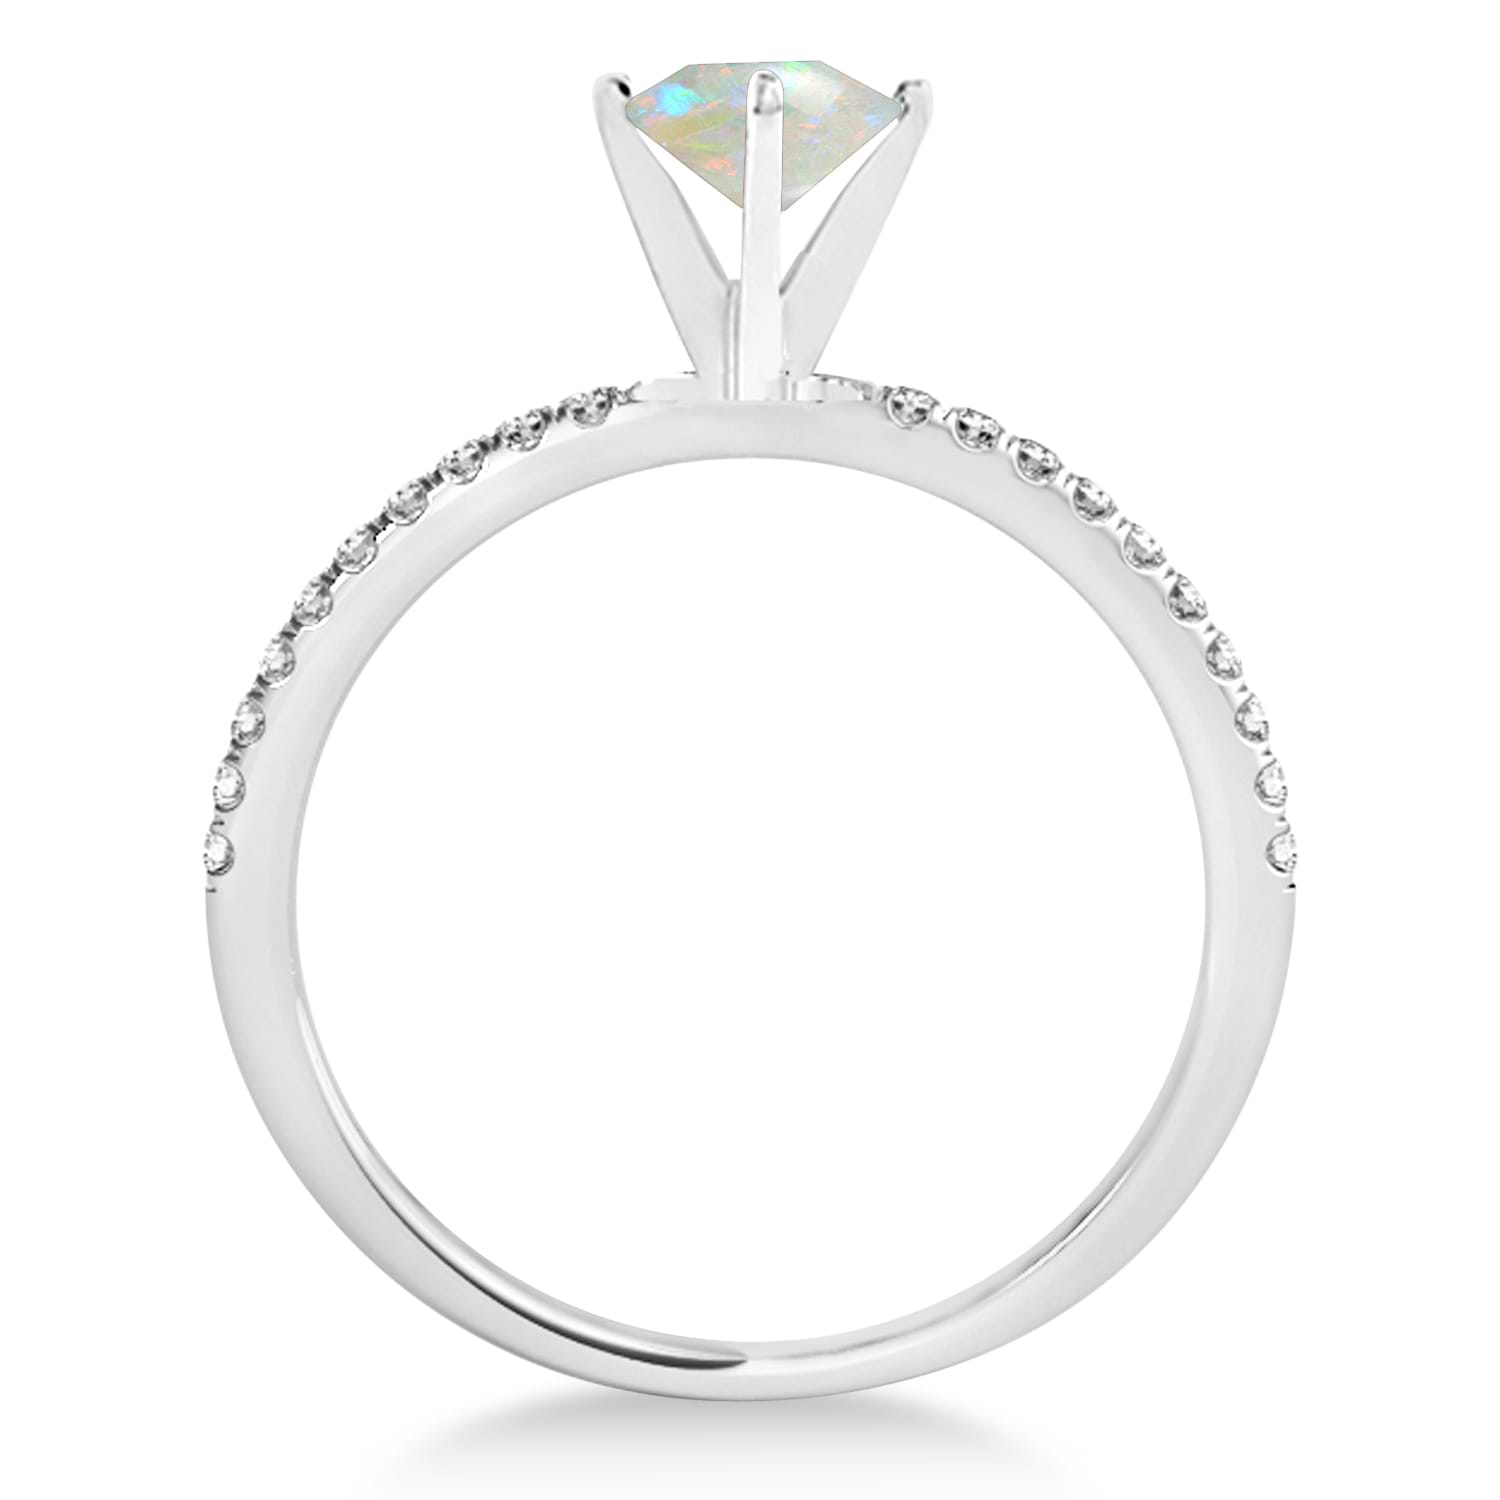 Opal & Diamond Accented Oval Shape Engagement Ring 14k White Gold (2.00ct)